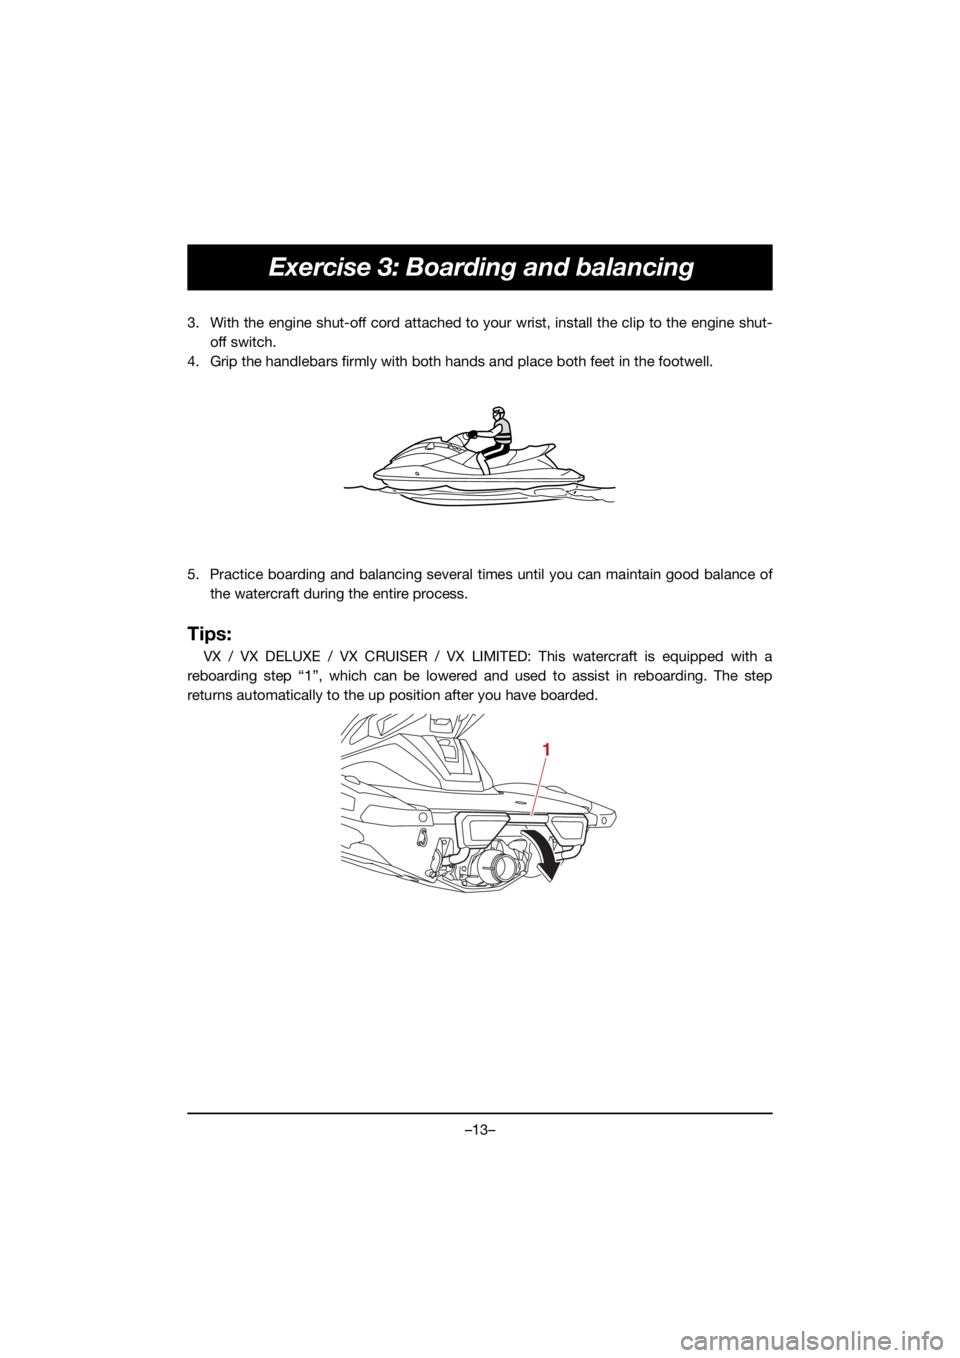 YAMAHA VX DELUXE 2021  Owners Manual –13–
Exercise 3: Boarding and balancing
3. With the engine shut-off cord attached to your wrist, install the clip to the engine shut-off switch.
4. Grip the handlebars firmly with both hands and p